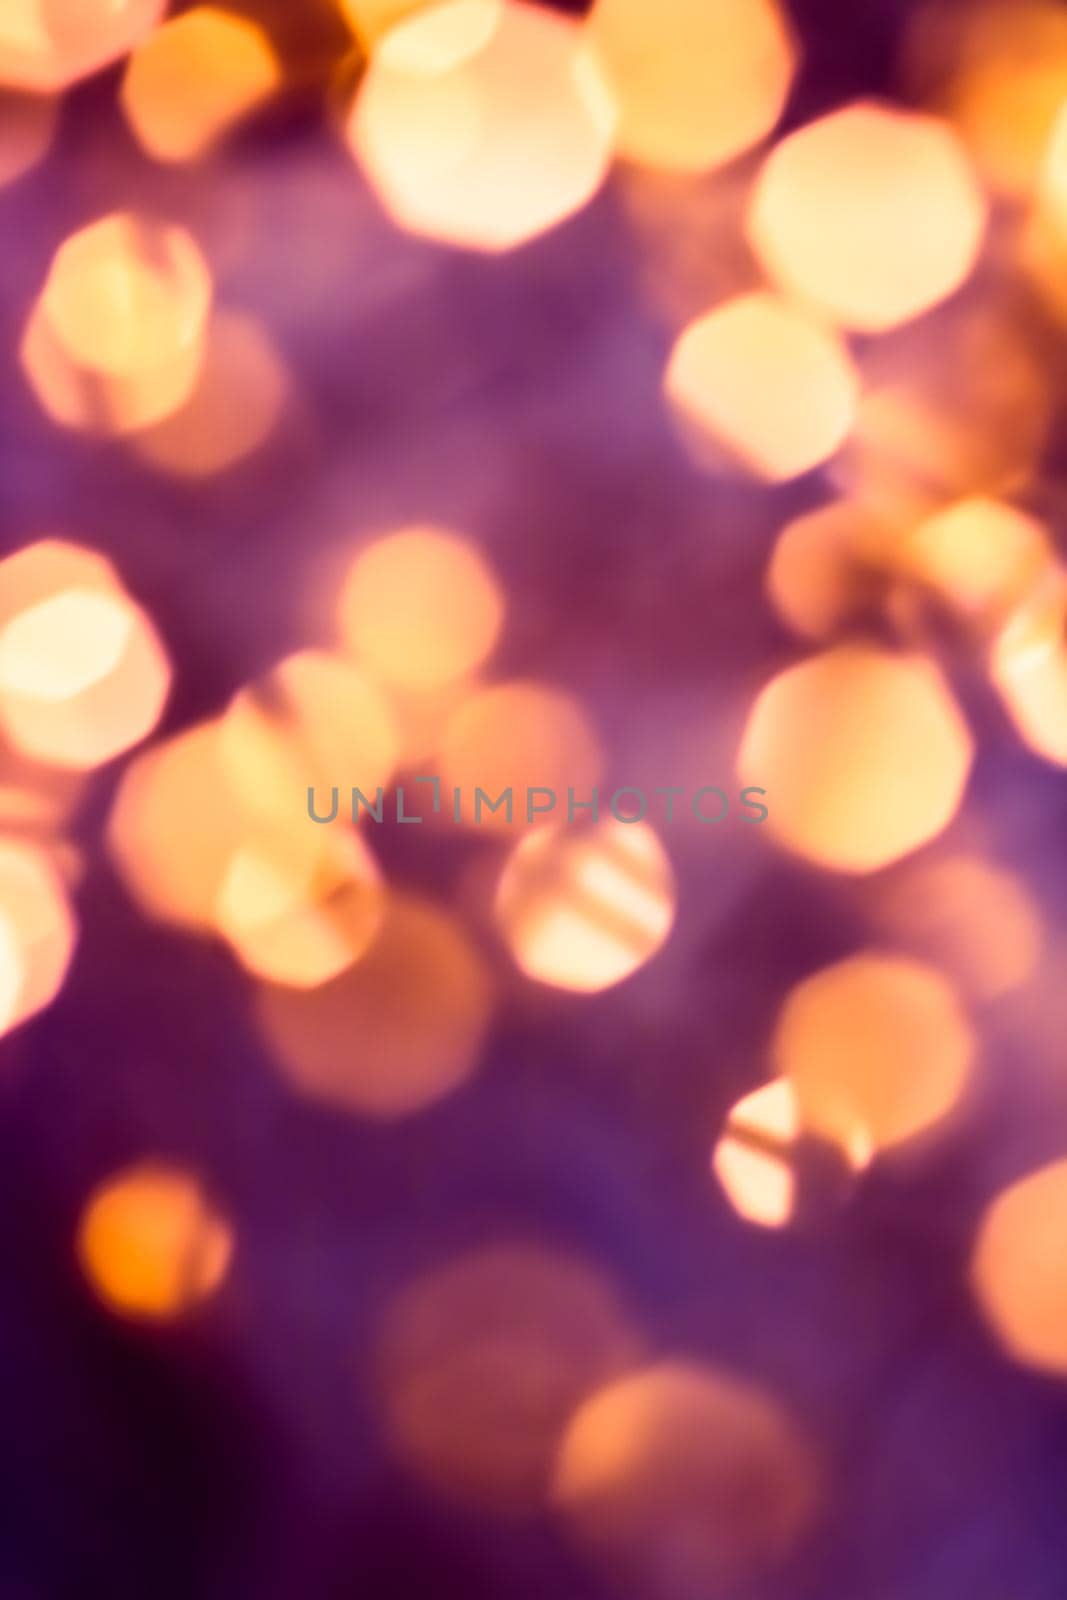 Glamorous golden shiny glow and glitter, luxury holiday background by Anneleven